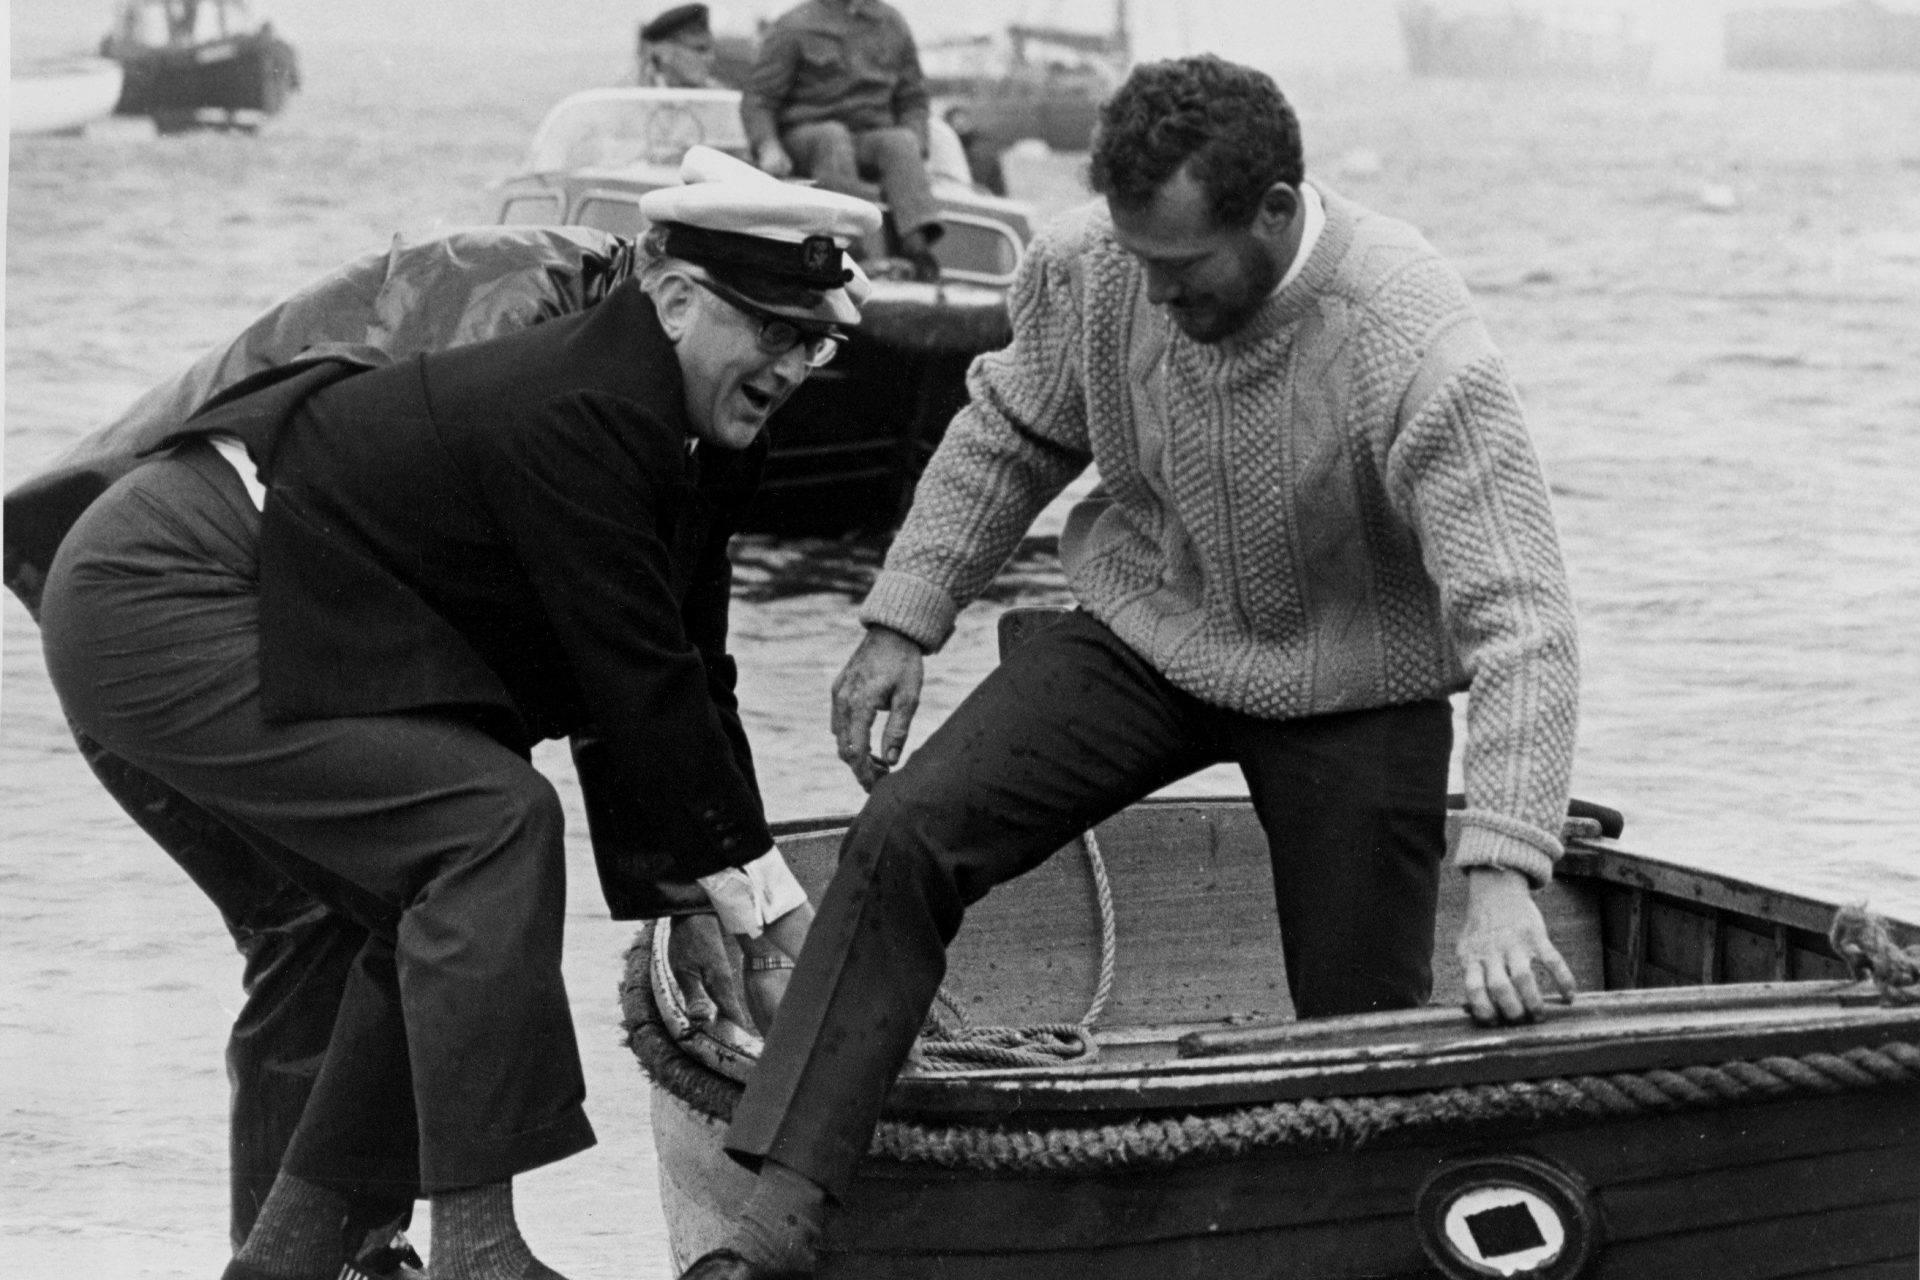 <p>Robin Knox-Johnston, a 28-year-old British merchant marine officer, realized a non-stop solo circumnavigation around the world was “about all there’s left to do now”. Knox-Johnston was born and raised in London where he joined the Merchant Navy in 1957-1968. He was an experienced sailor who was well-traveled for his age, but above all, he was determined to be the first to complete the race.</p>